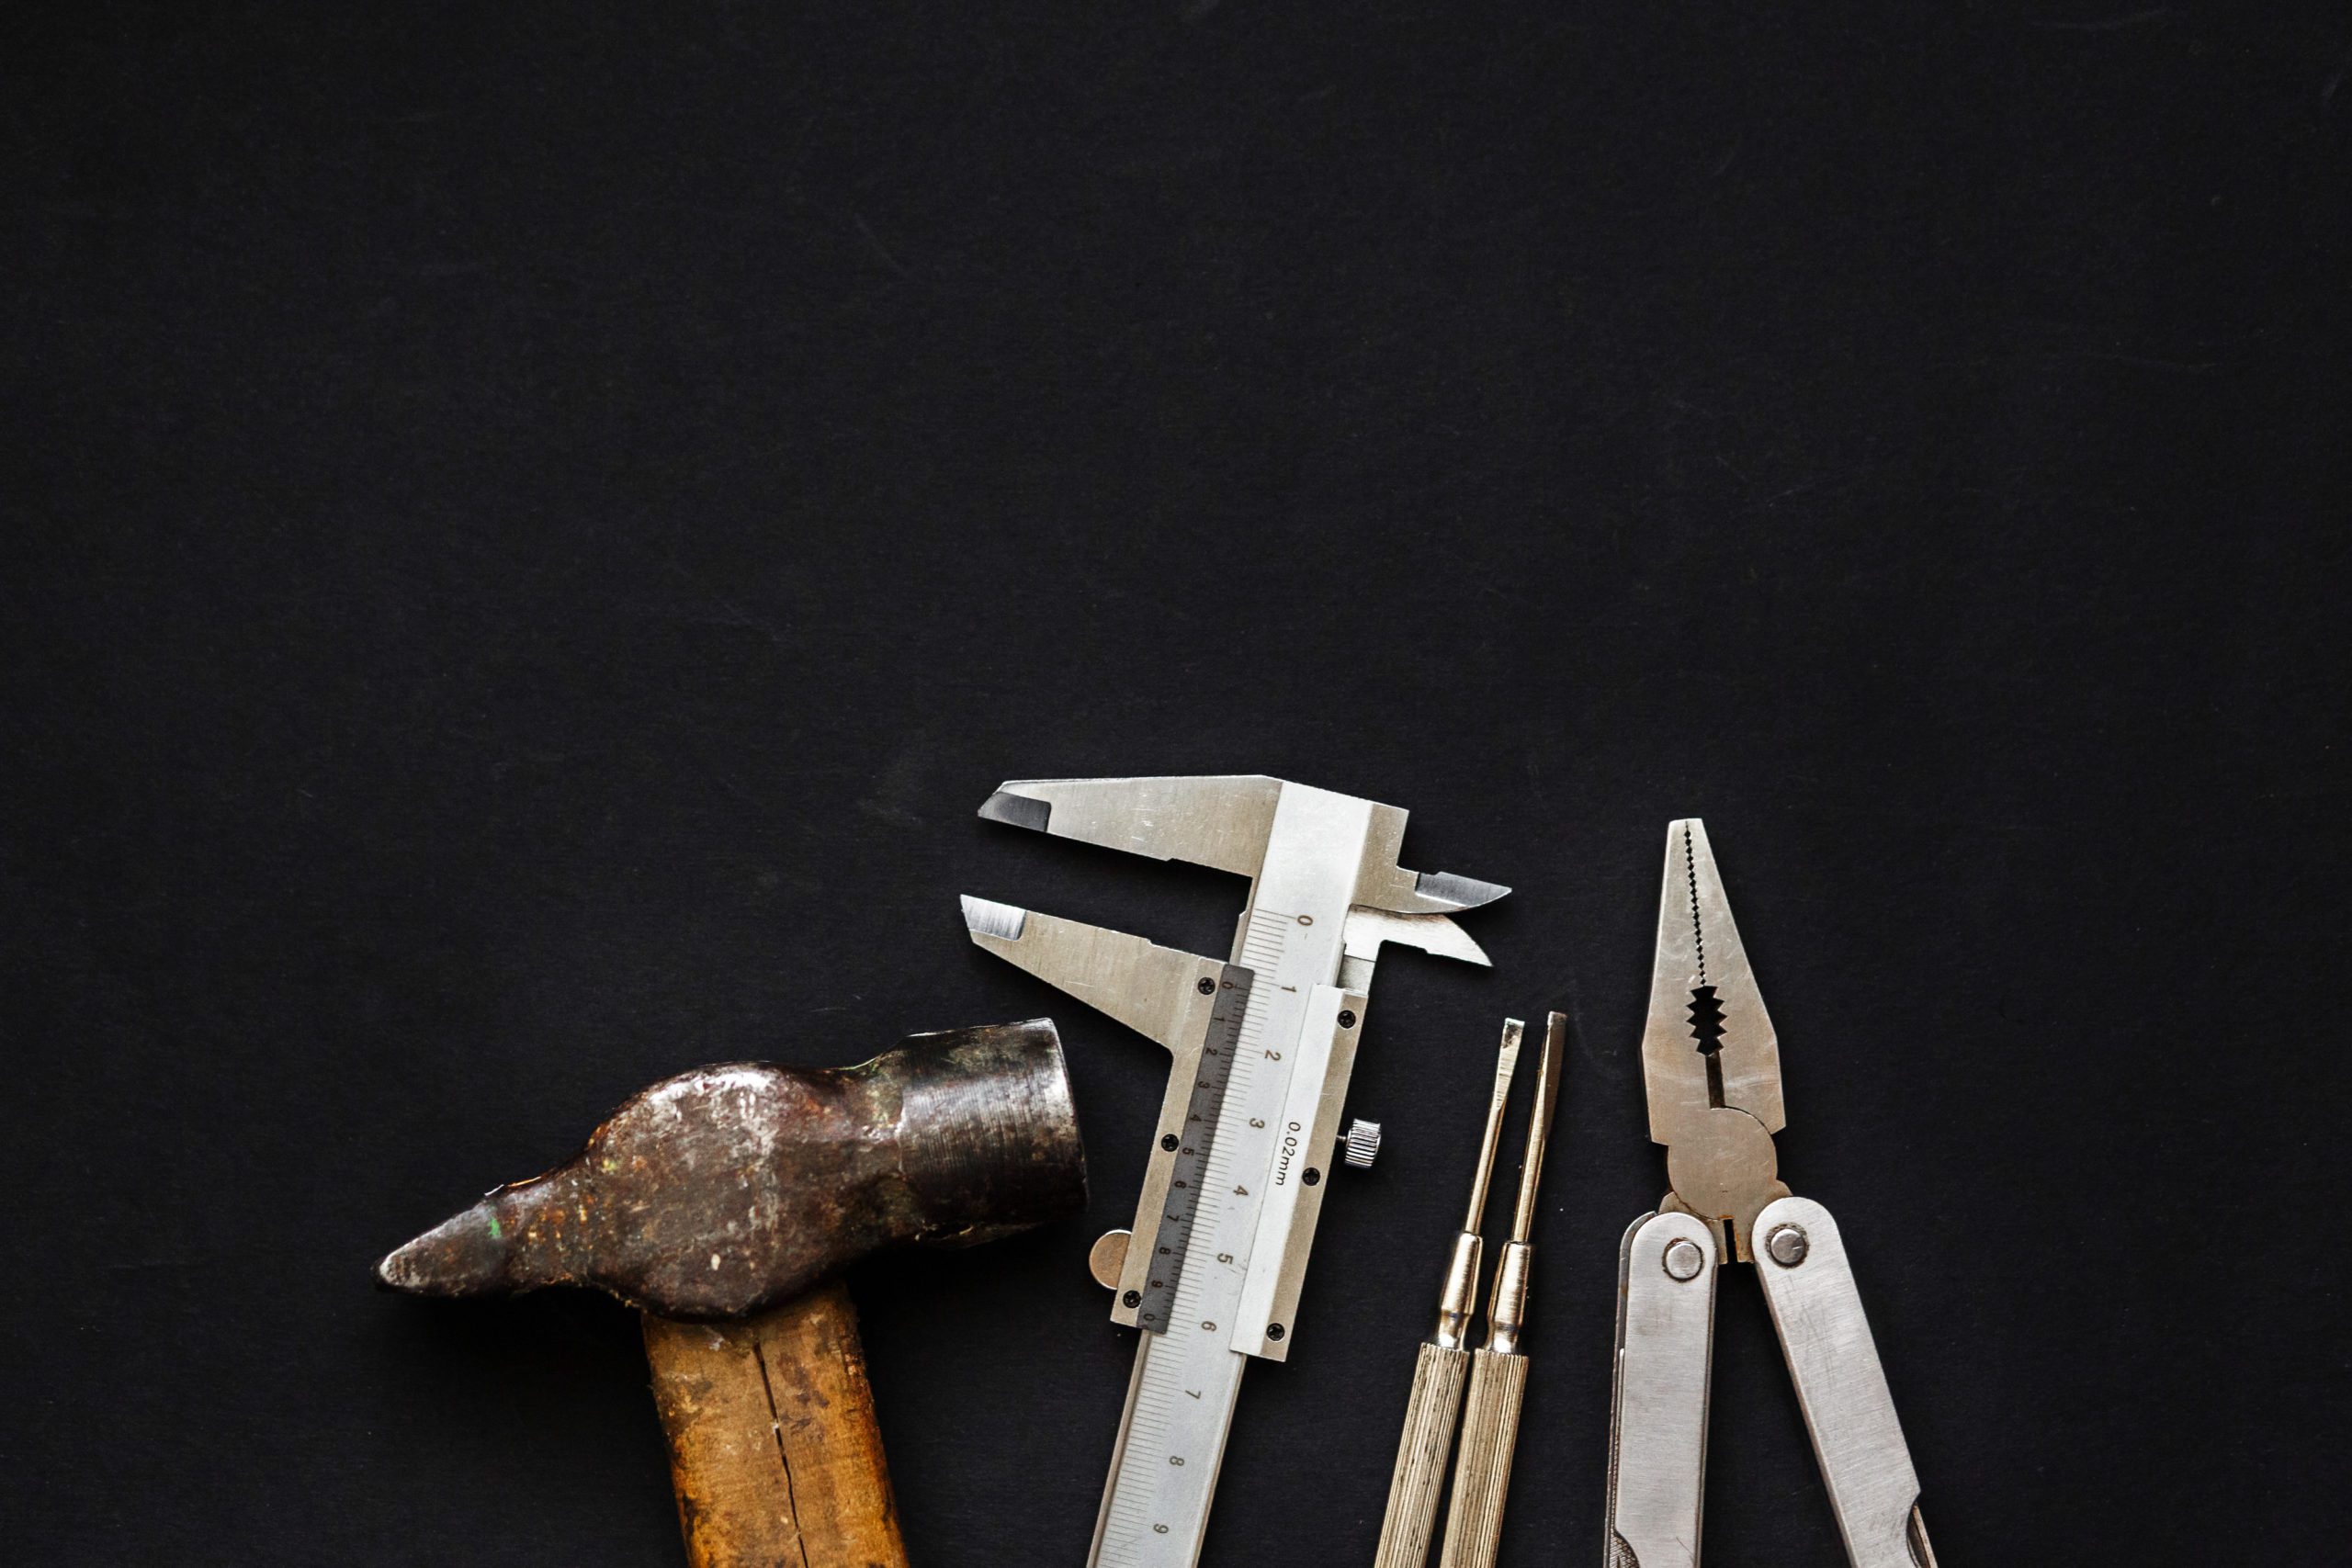 Pre-owned hand tools on black background